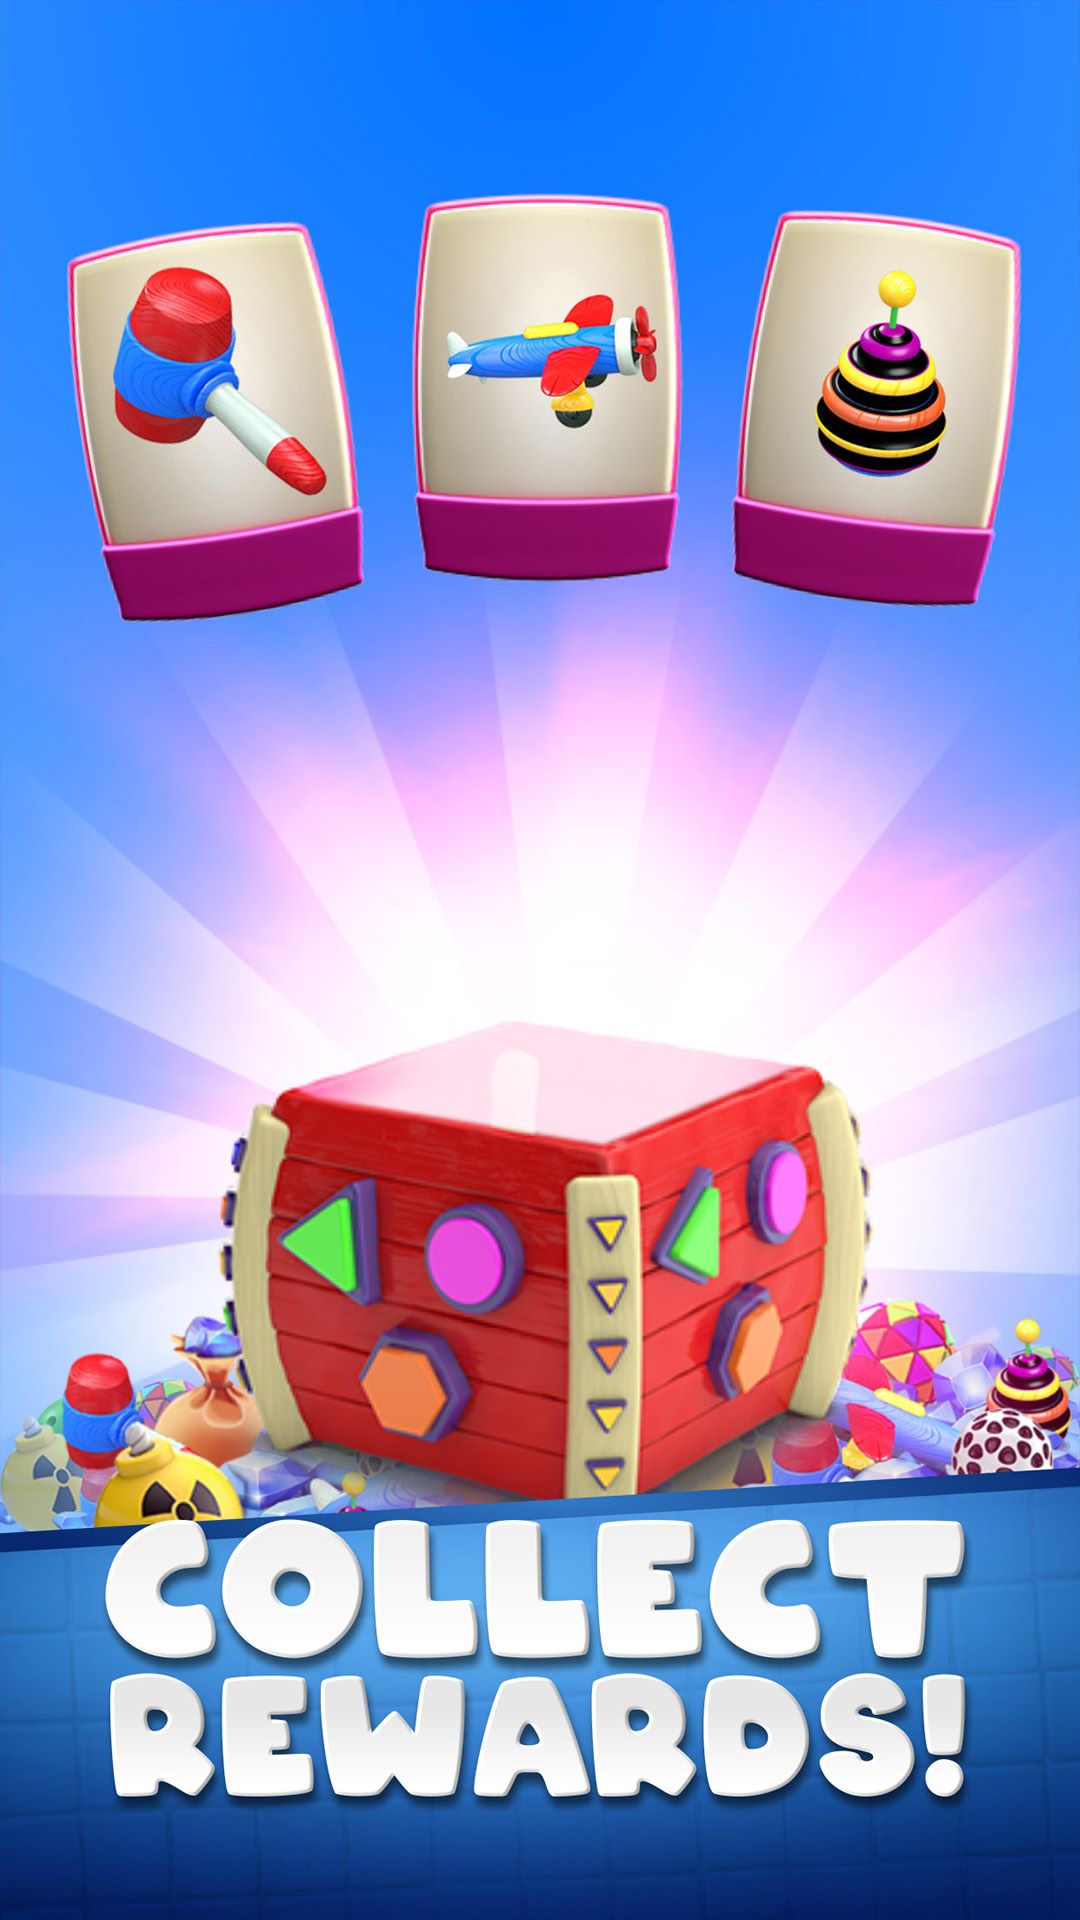 Candy Sweet Fruit games soda jelly blast 3 crush app Meads Puzzle : Free  puzzle game Download for Kids::Appstore for Android